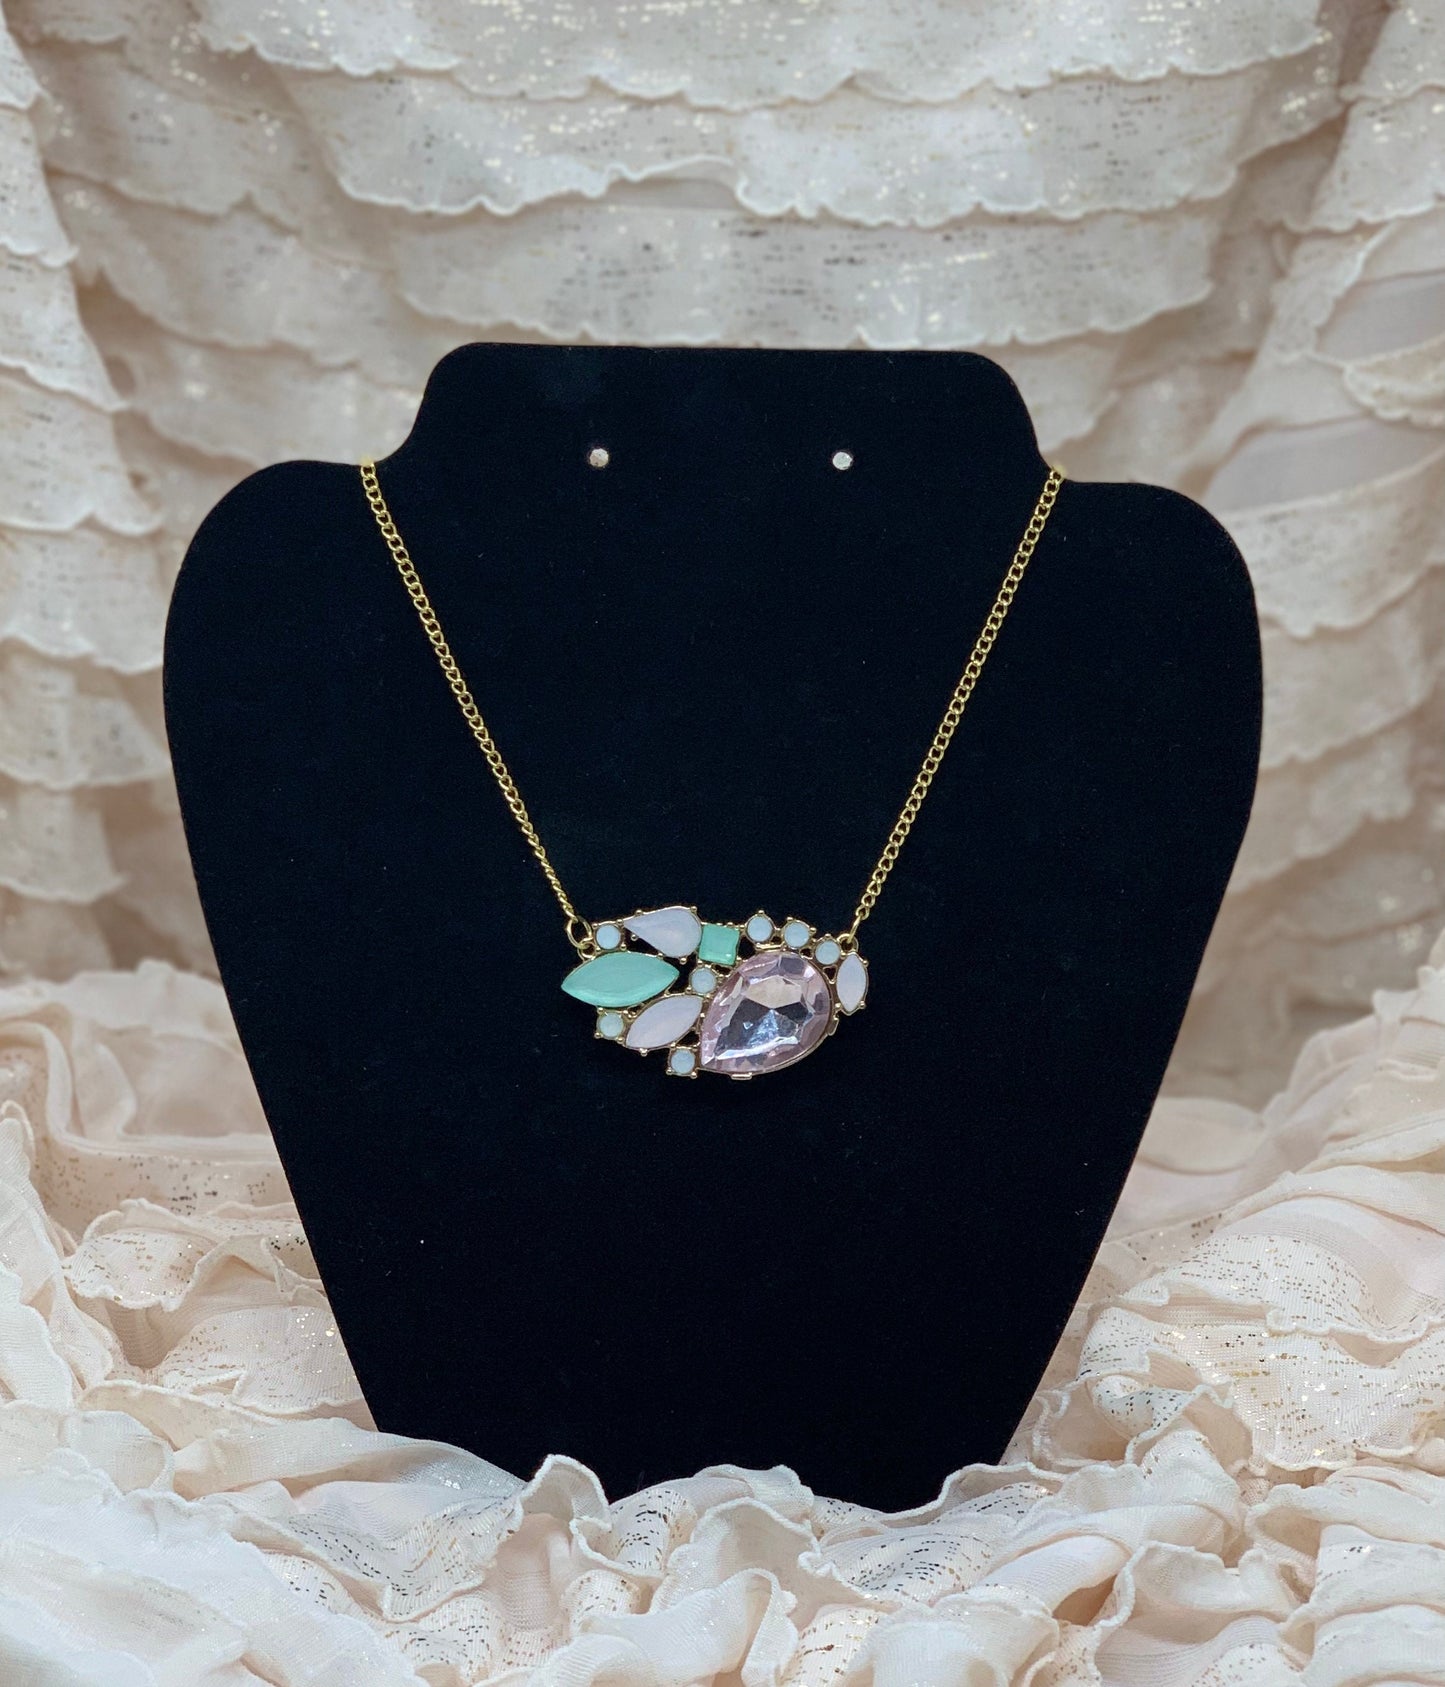 Pink and Mint, Rhinestone Necklace pendant "Minty"